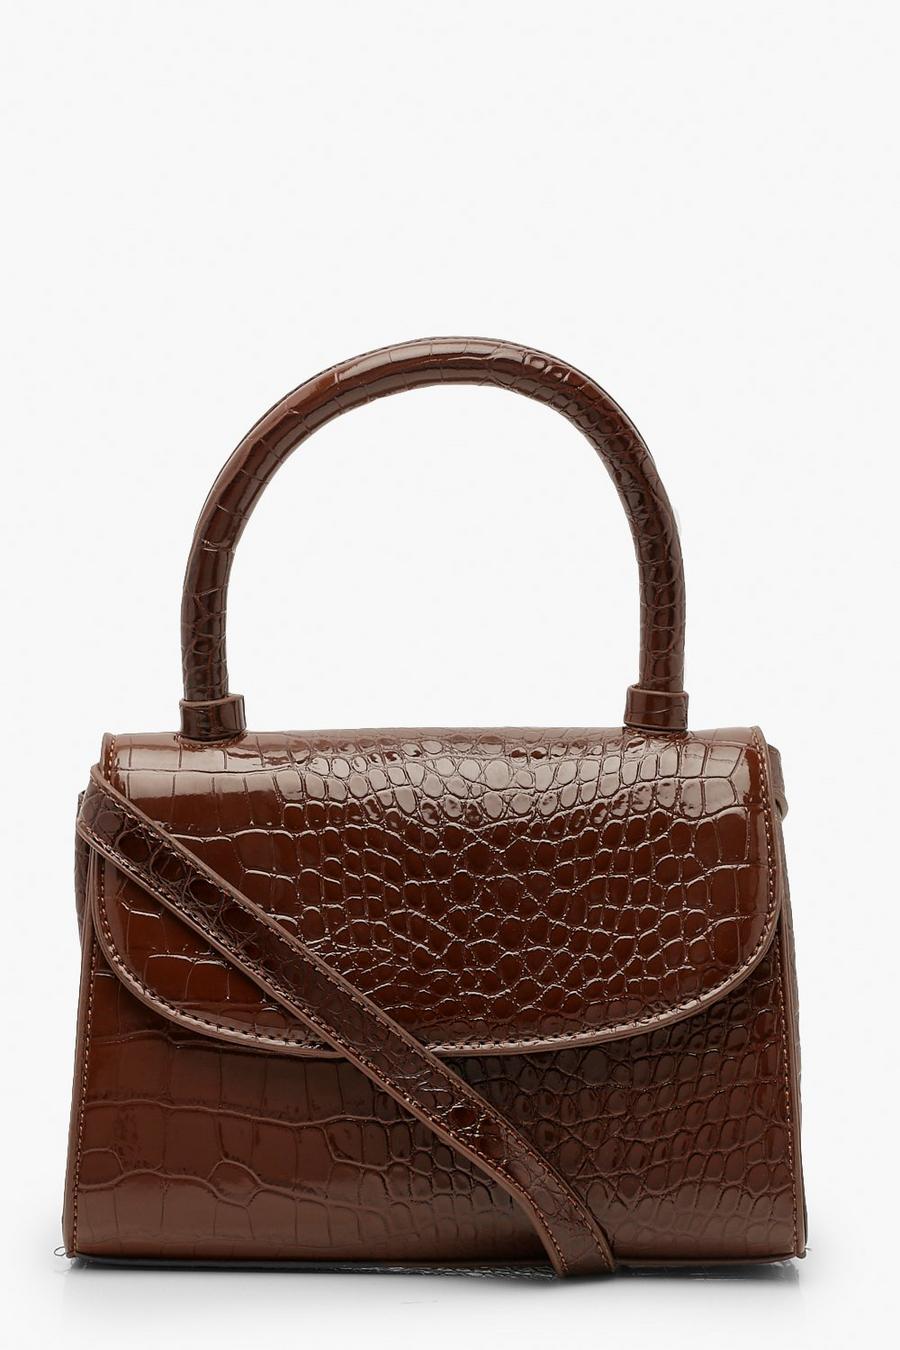 Patent Croc Structured Cross Body Bag image number 1